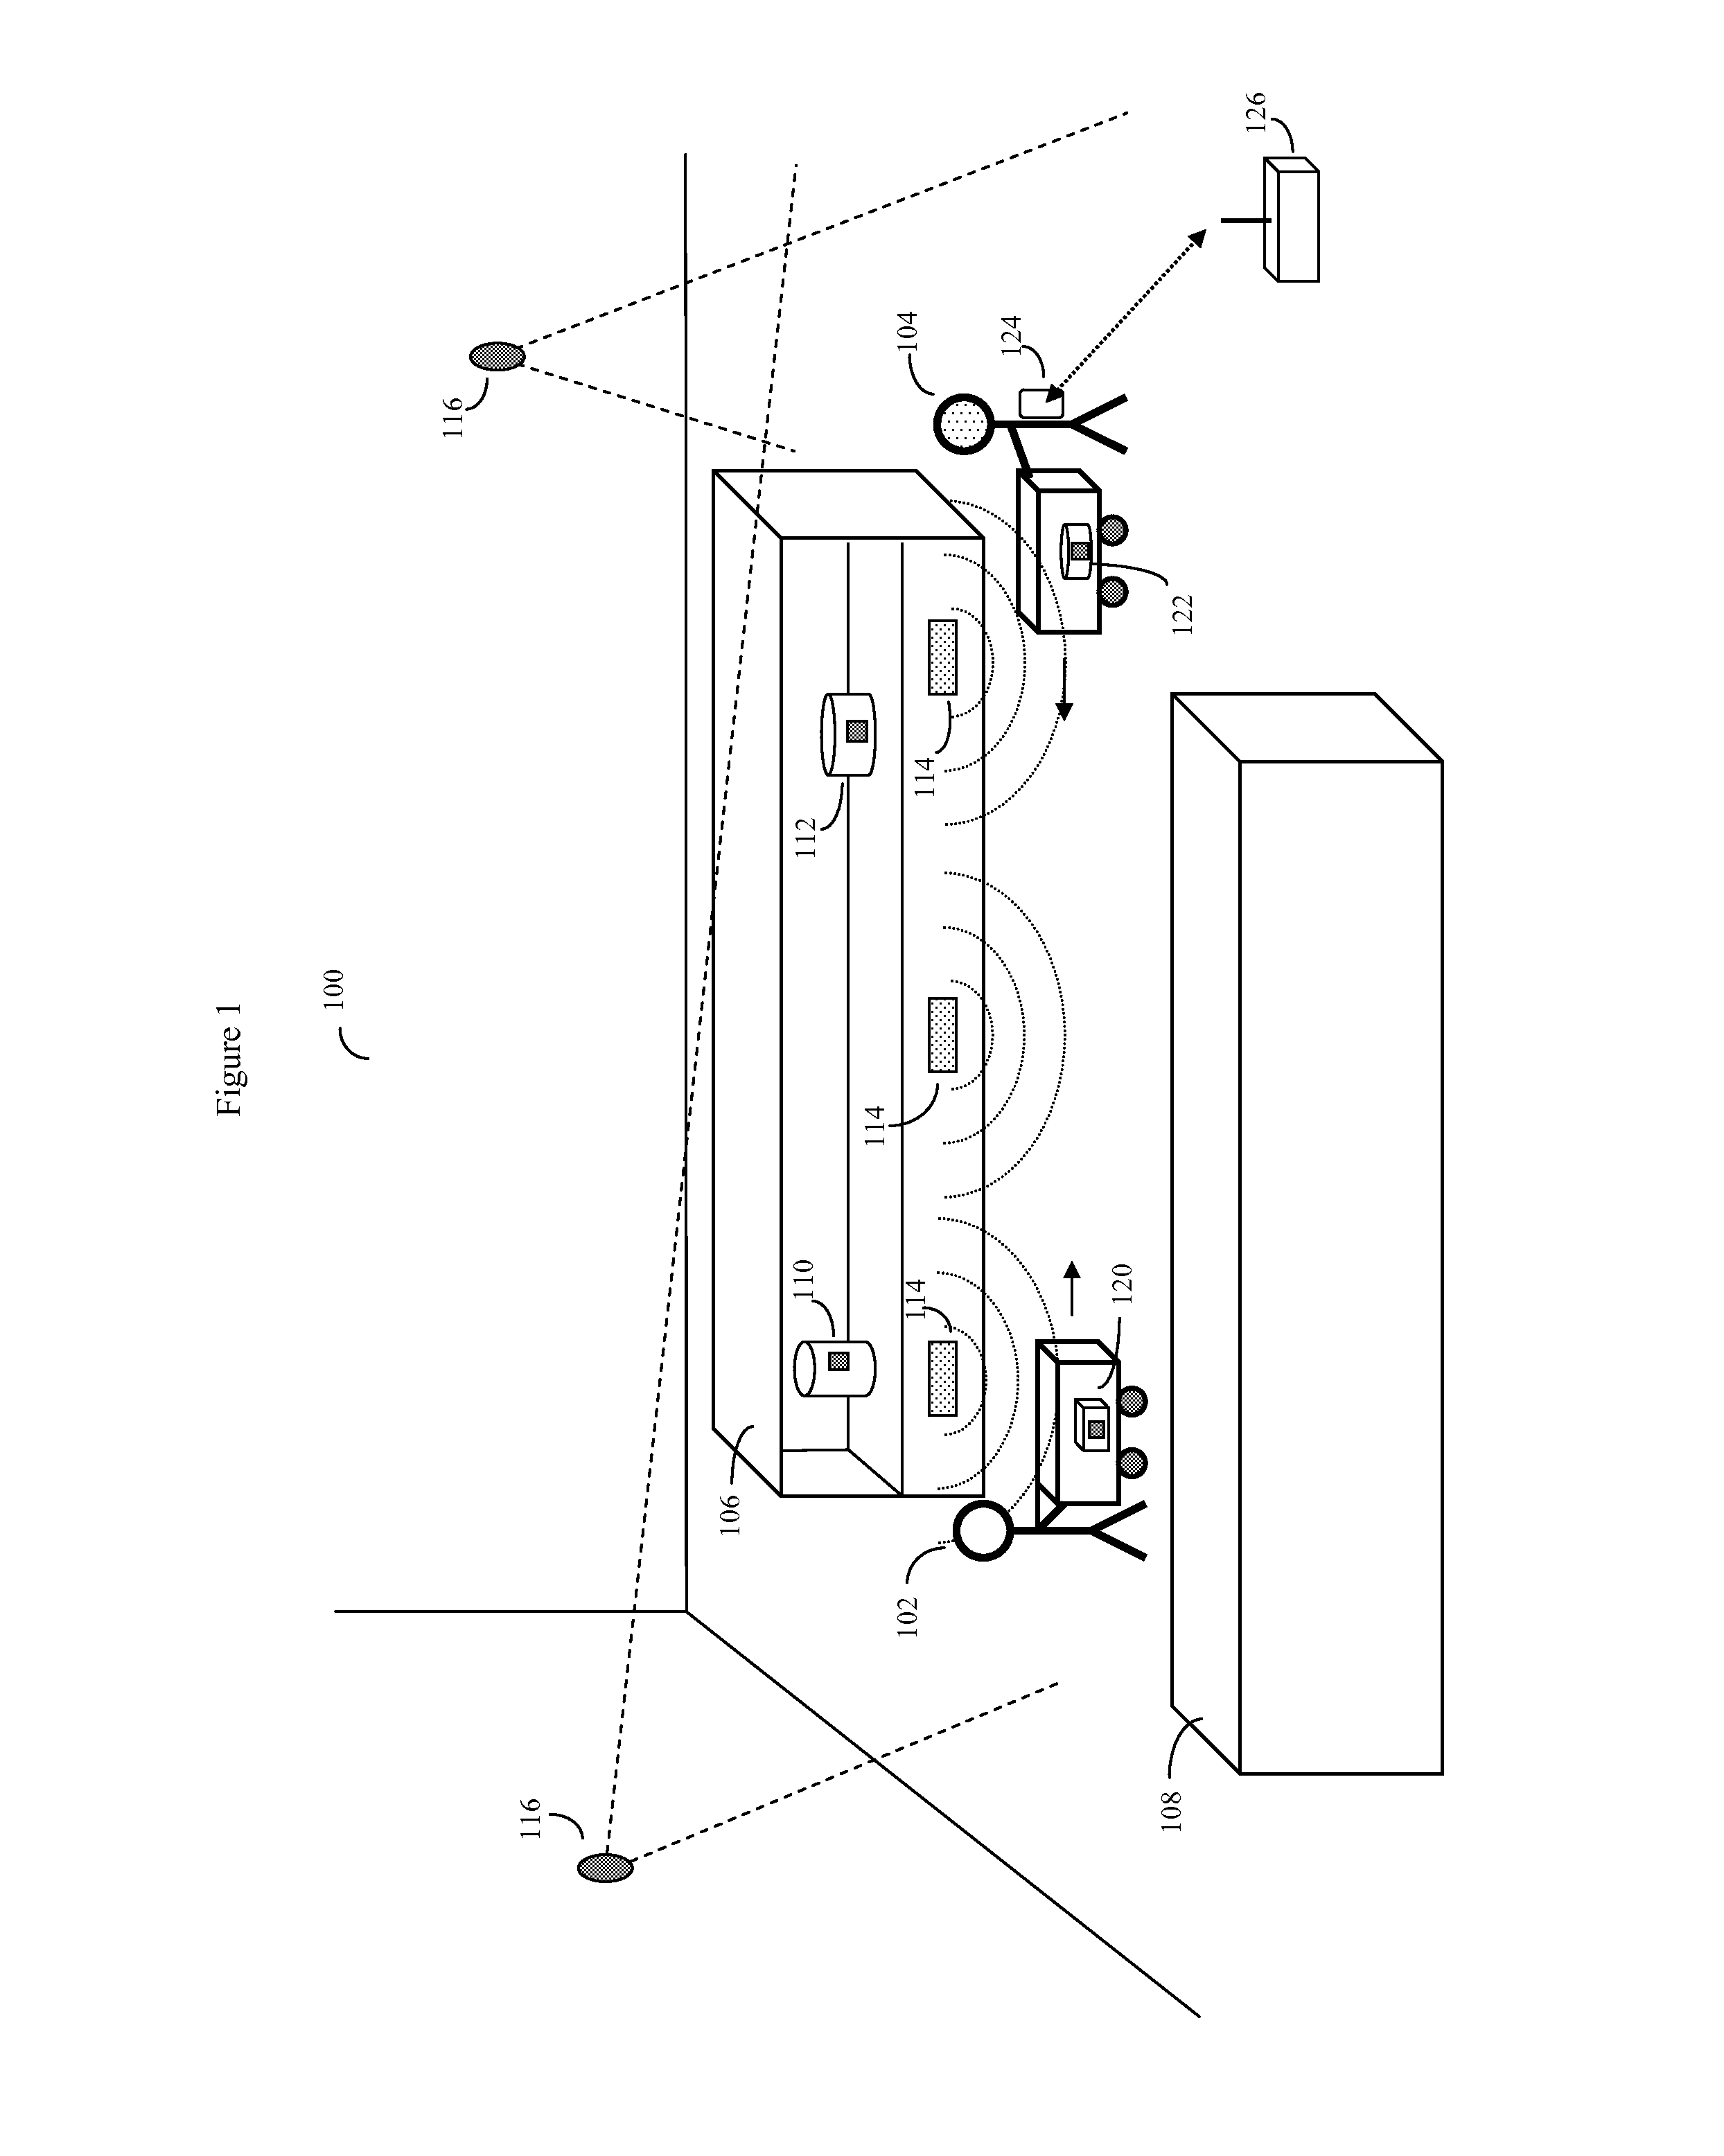 Method of tracking moveable objects by combining data obtained from multiple sensor types